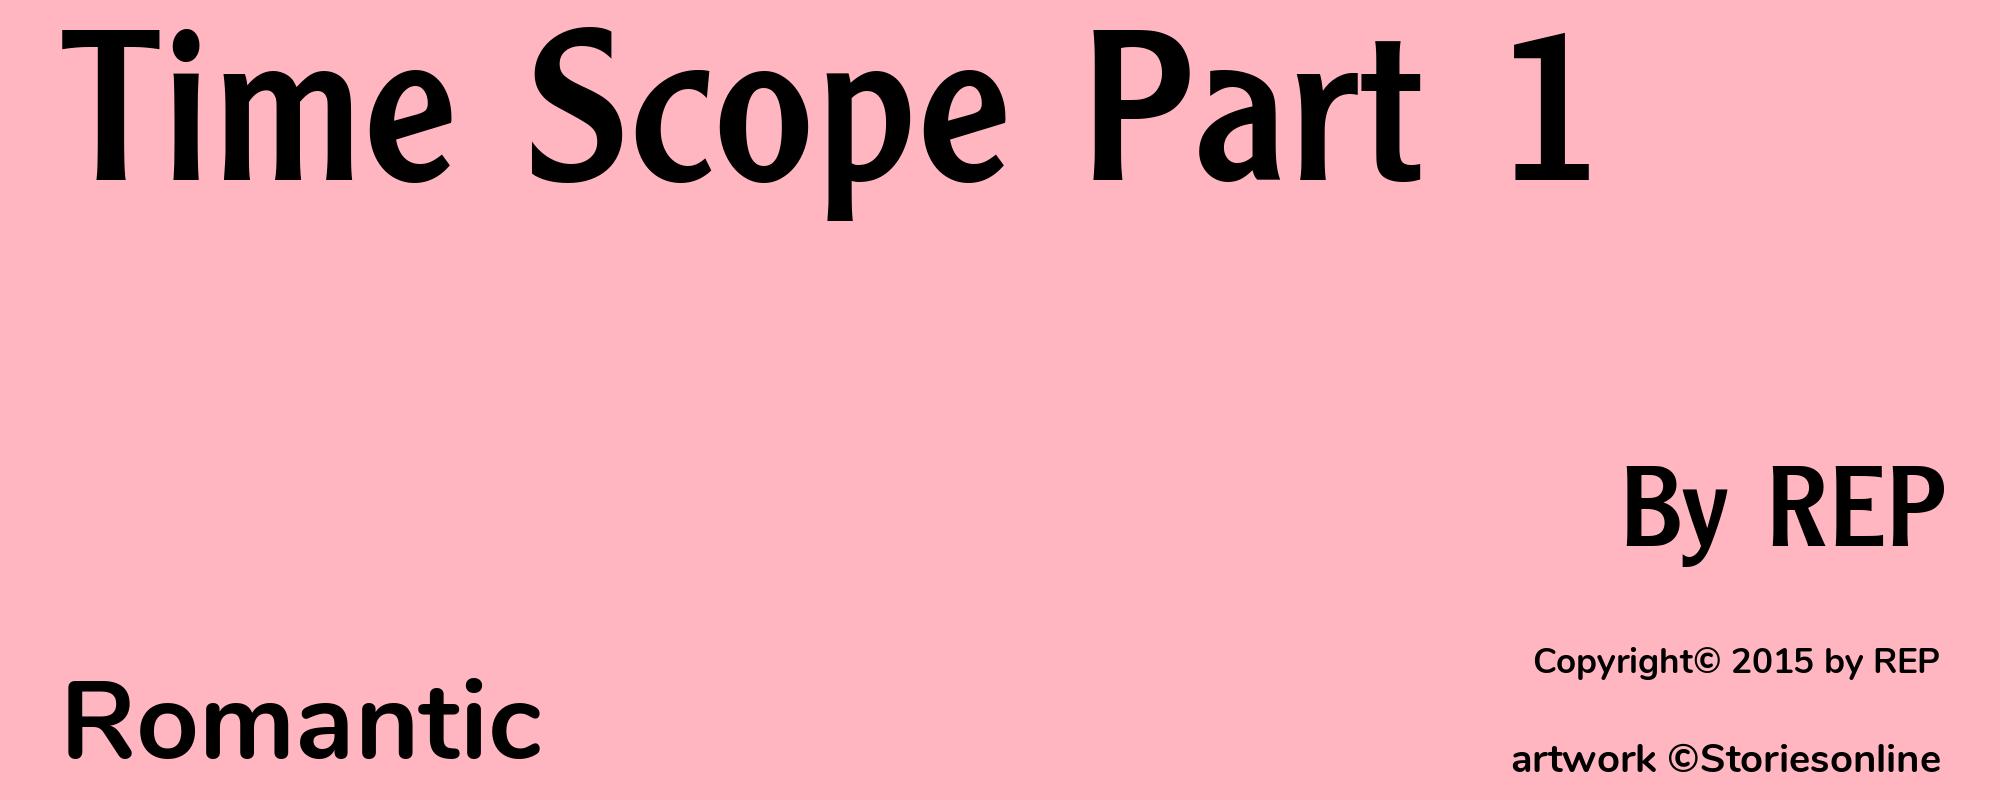 Time Scope Part 1 - Cover